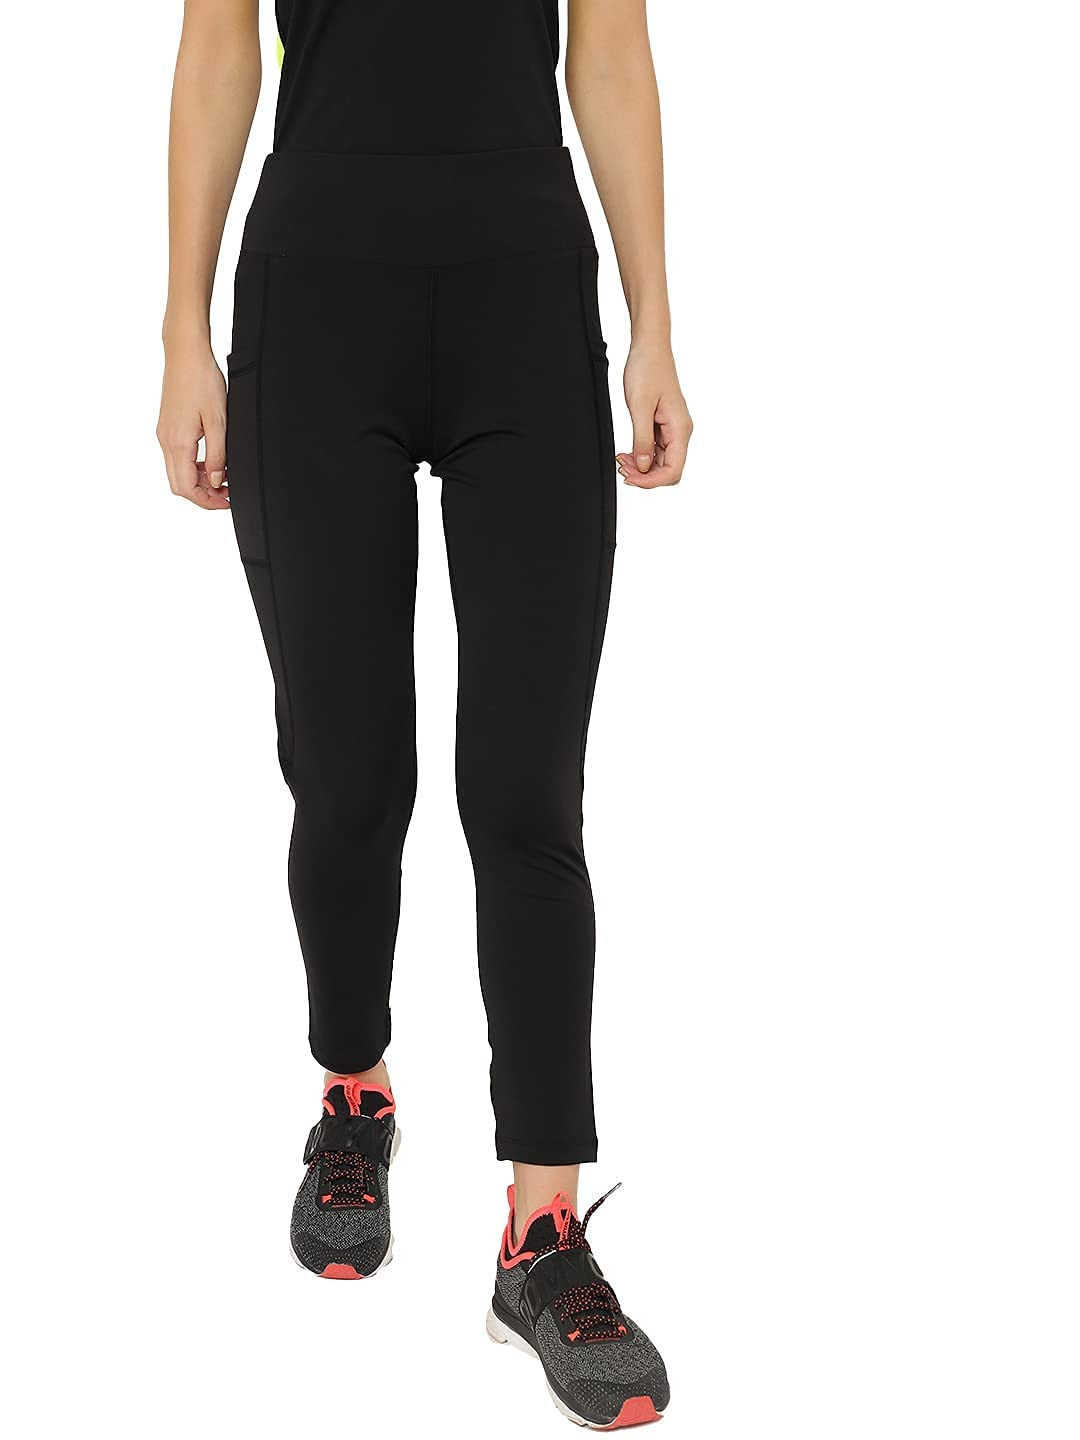 New Style Designer Yoga Tracksuit For Women Fitness Align Pant Seamless Gym  Leggings And Workout Set With Active Shirt For Active Ladies From  Bianvincentyg, $21.16 | DHgate.Com